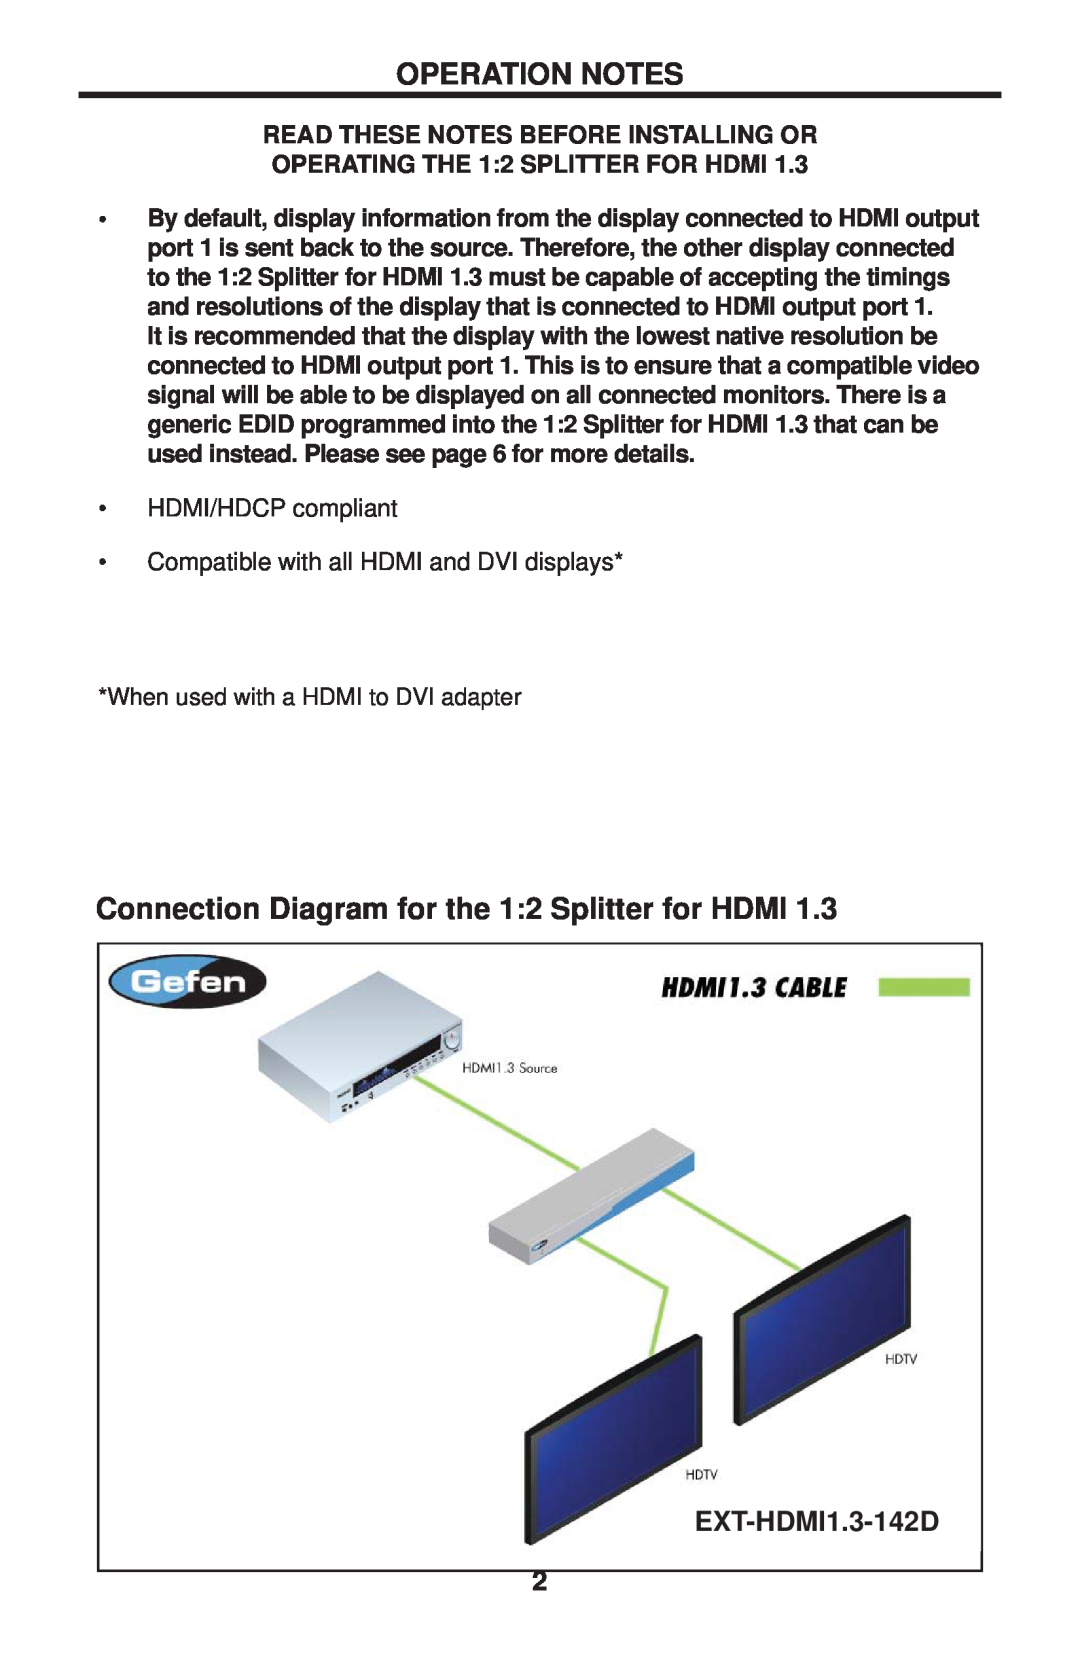 Gefen user manual Operation Notes, Connection Diagram for the 12 Splitter for HDMI, EXT-HDMI1.3-142D 